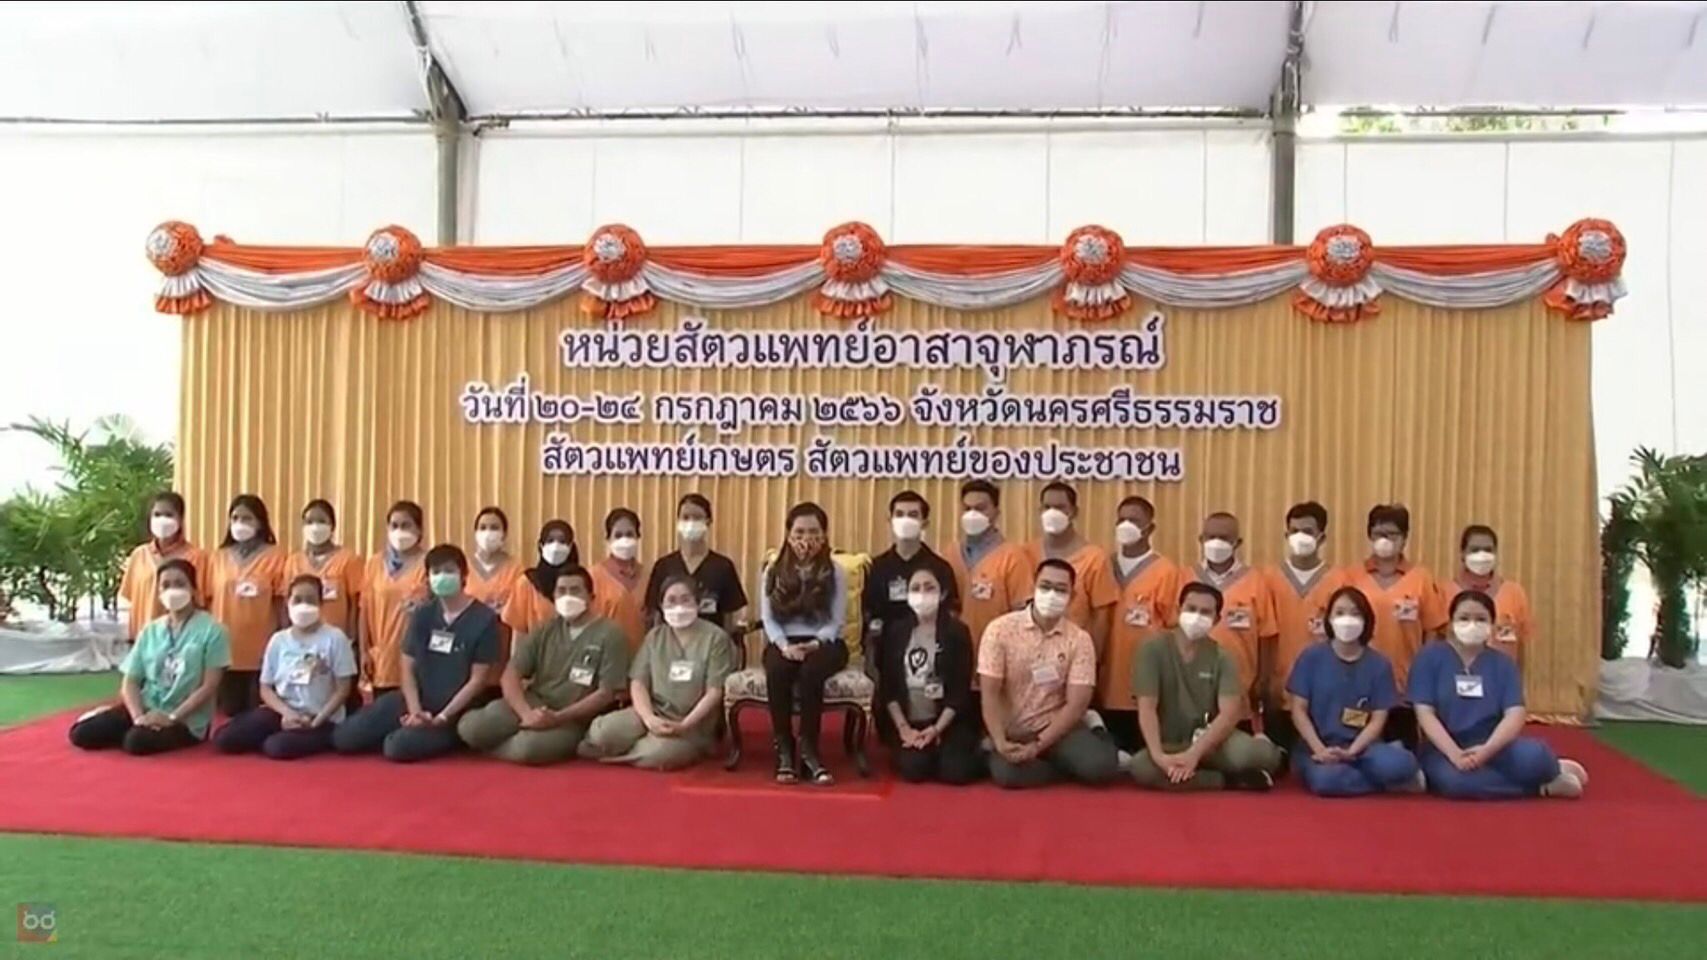 The princess, along with Soi Dog and other members from the sterilisation department.